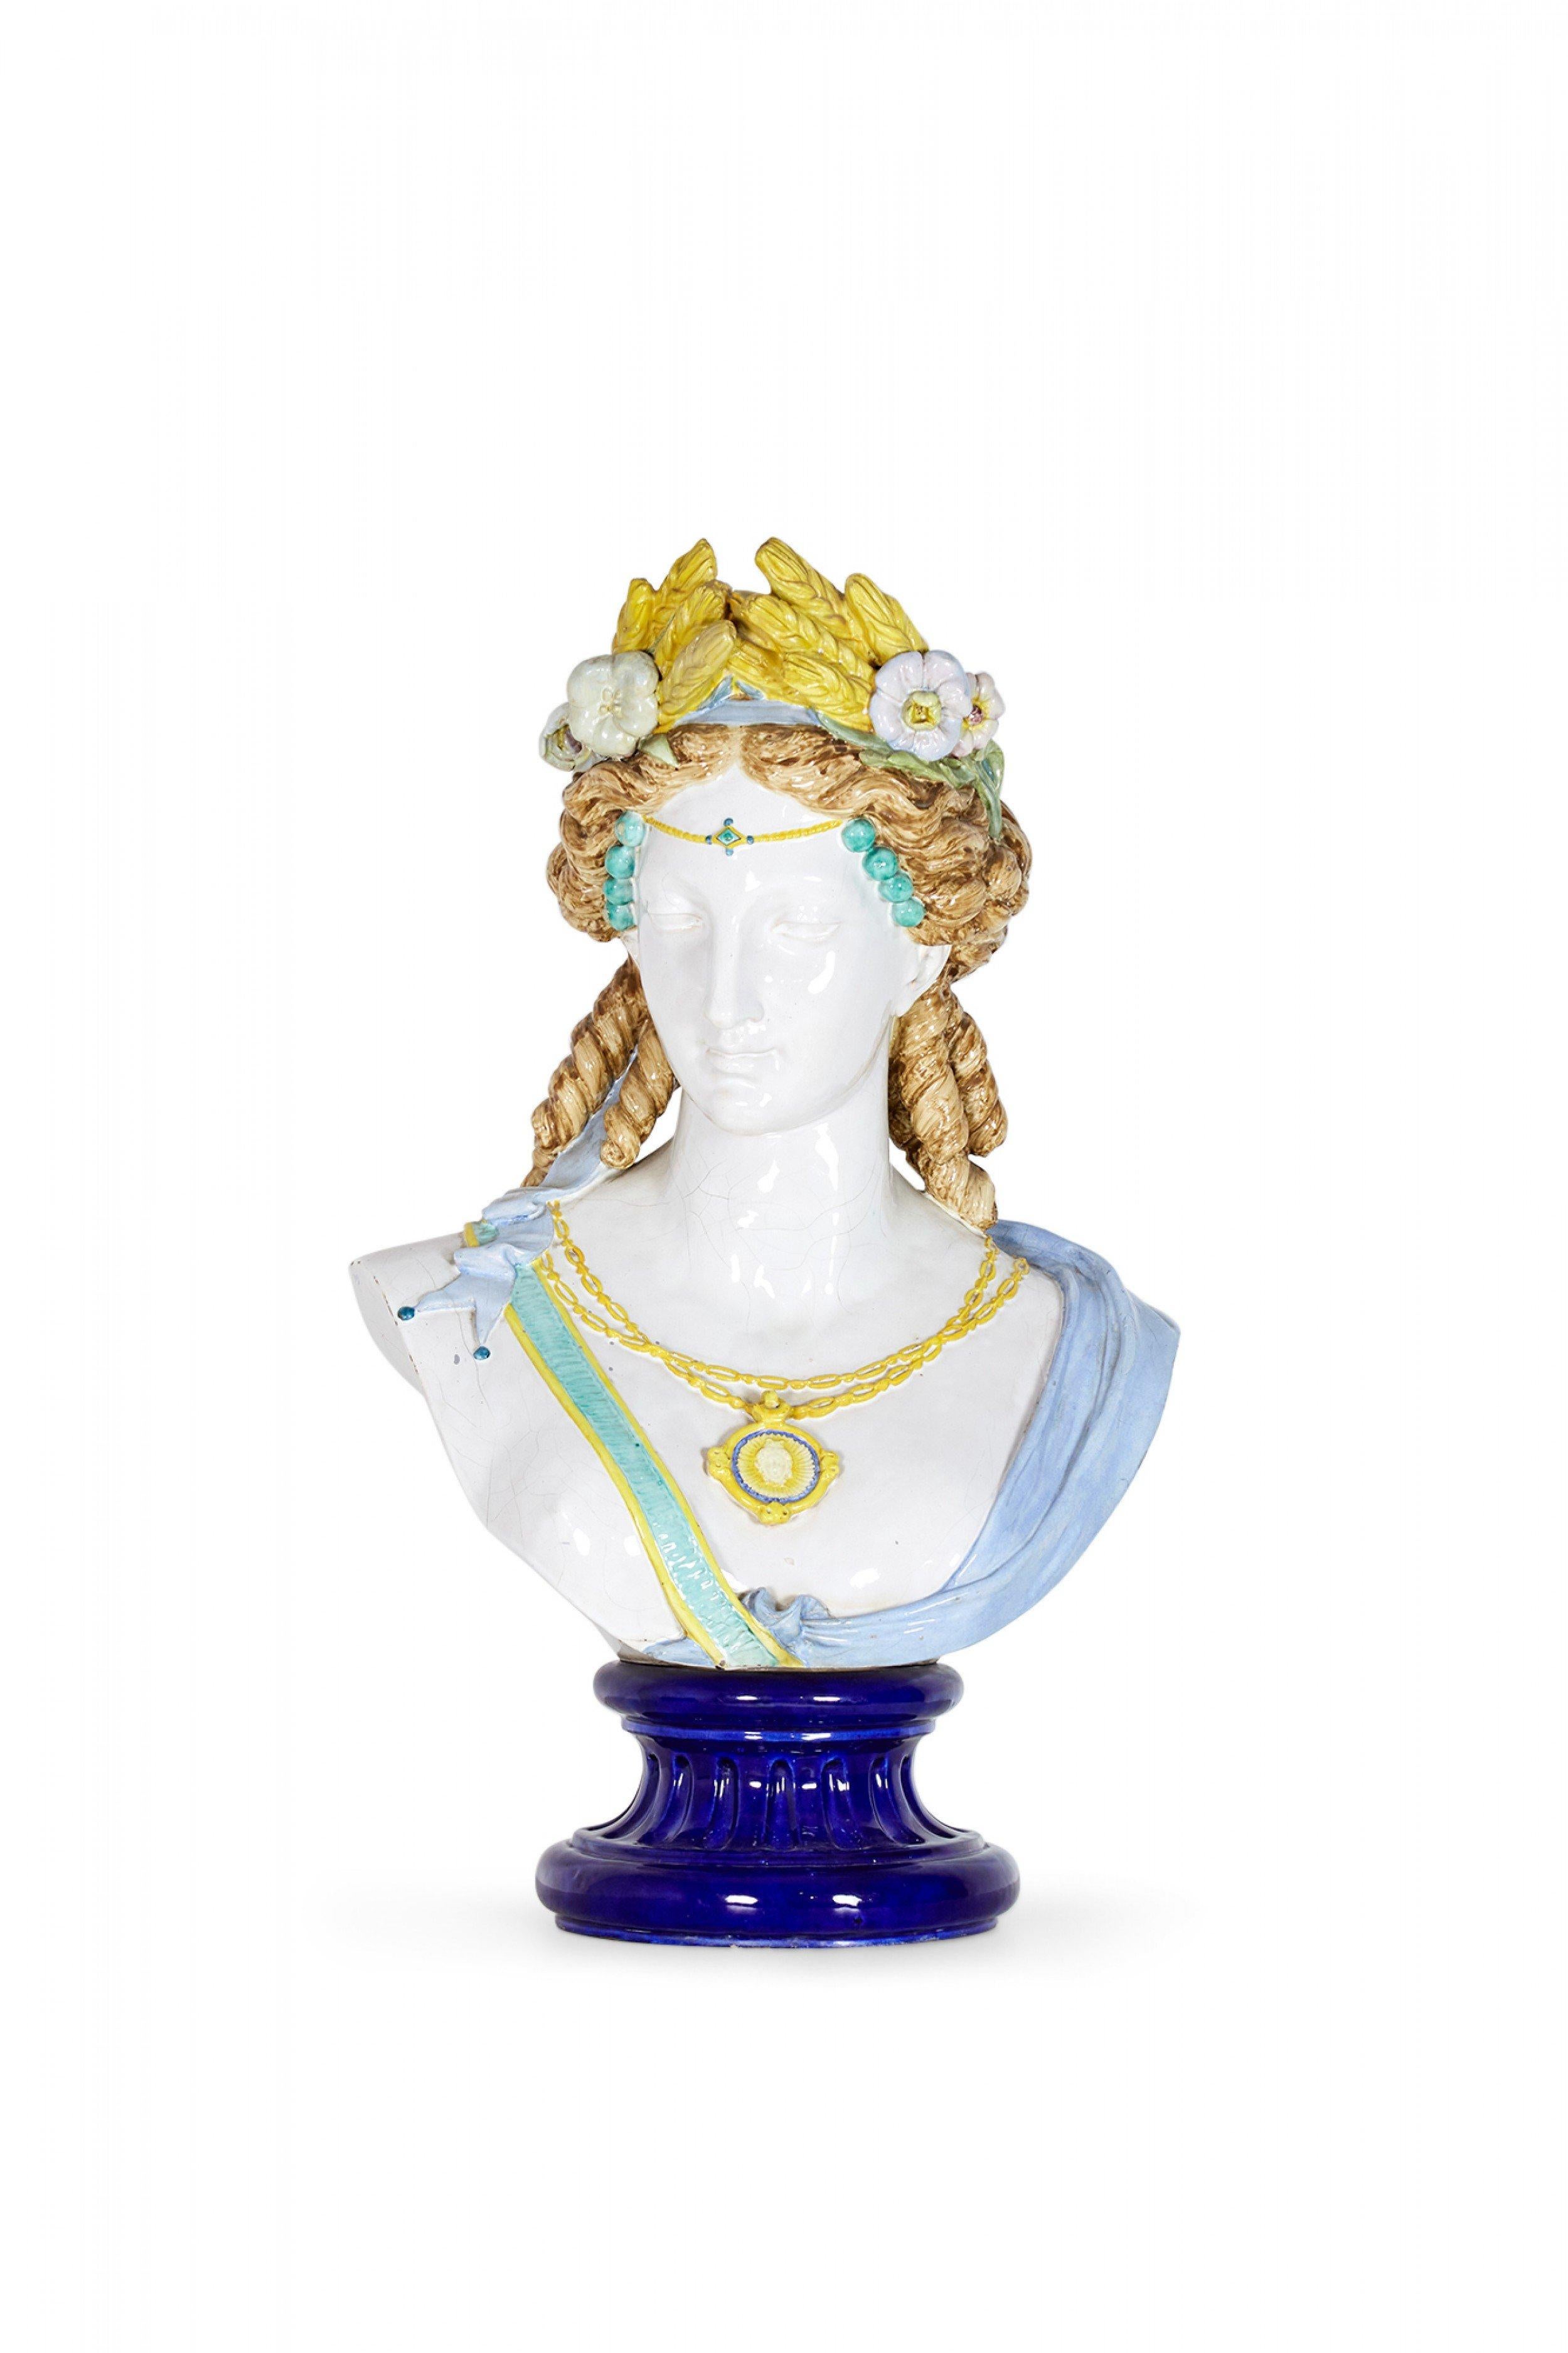 Pair of French 2nd Empire (circa 1865) large faience busts in polychrome pottery depicting female figures adorned in laurels of wheat and grapes on separate round fluted pedestal bases (signed AUGUSTE JEAN, FRANCE, 1829-1896).